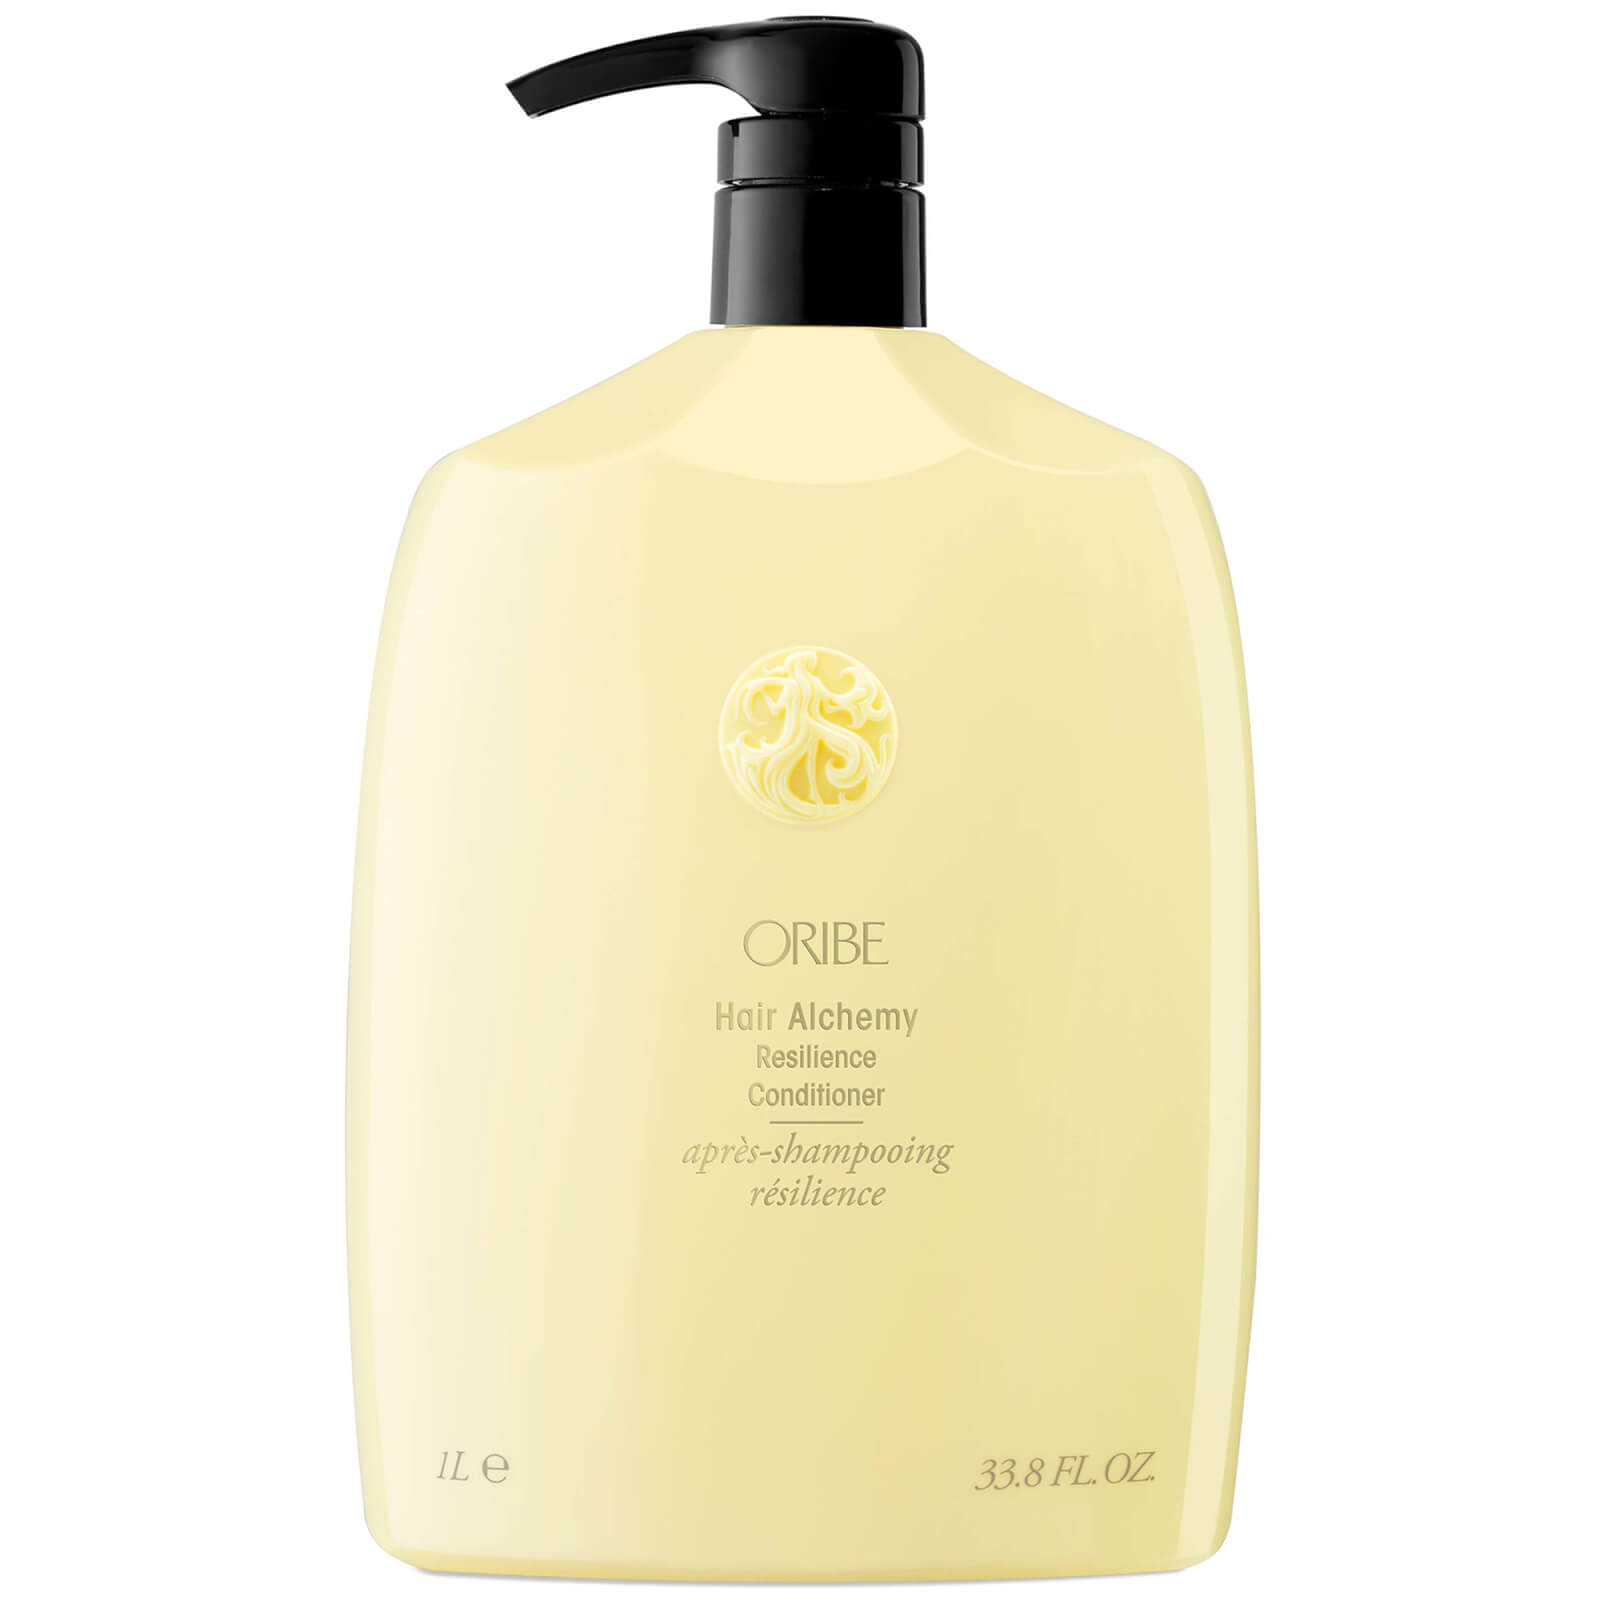 Shop Oribe Hair Alchemy Resilience Conditioner 33.8 oz